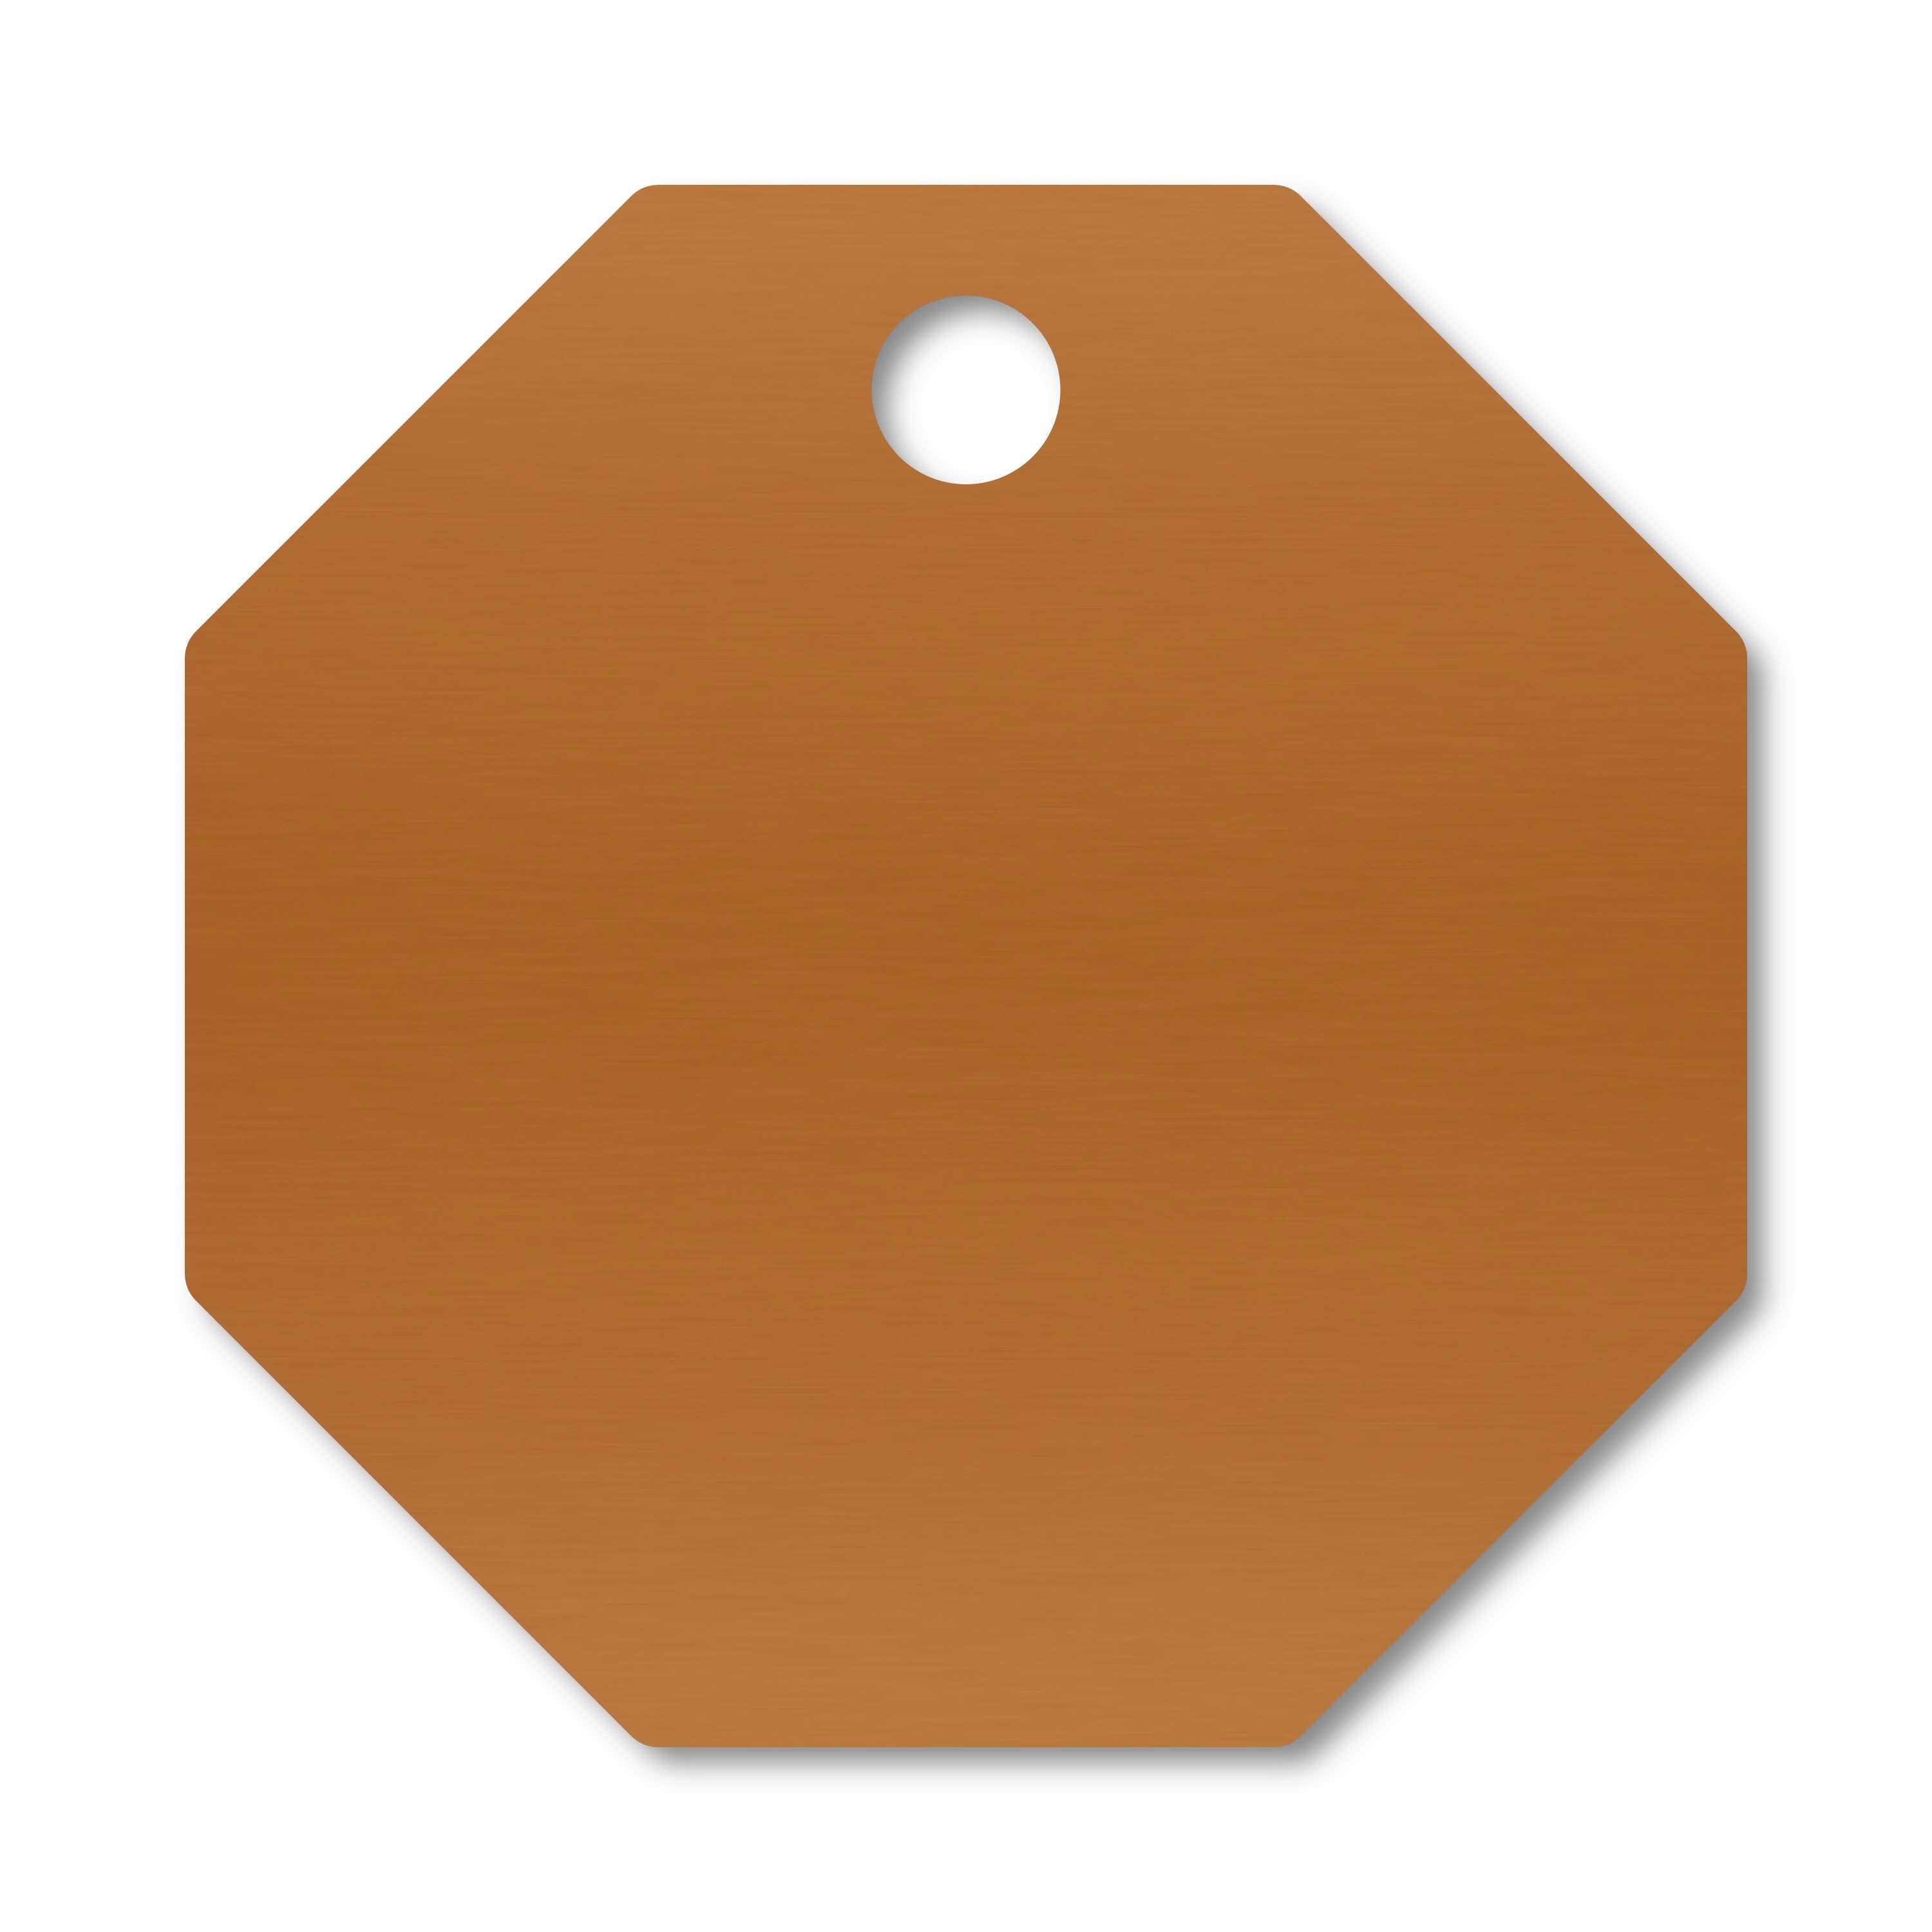 Anodized Aluminum Octagon Tags, 1-1/8" with 1/8" Hole, Laser Engraved Metal Tags Craftworks NW Orange 